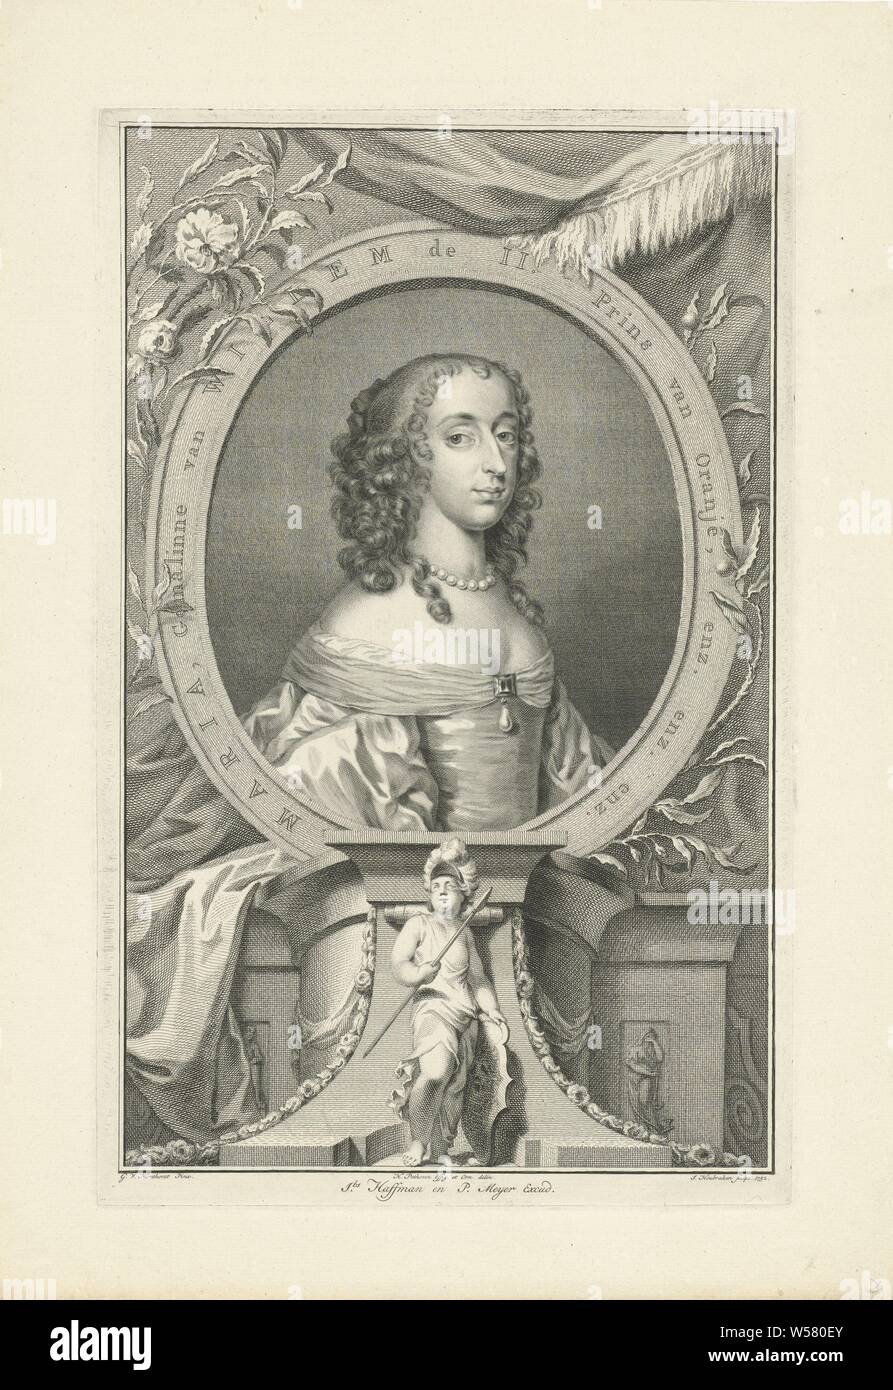 Portrait of Maria Henrietta Stuart, princess of Orange Geminals and mothers of the stadholders series title), Princess of Orange, wife of Prince William II of Orange-Nassau. Third print from a series of six with the pictures of the consort's mothers and mothers., Maria Henrietta Stuart, Jacob Houbraken (mentioned on object), Amsterdam, 1752, paper, engraving, h 361 mm × w 228 mm Stock Photo